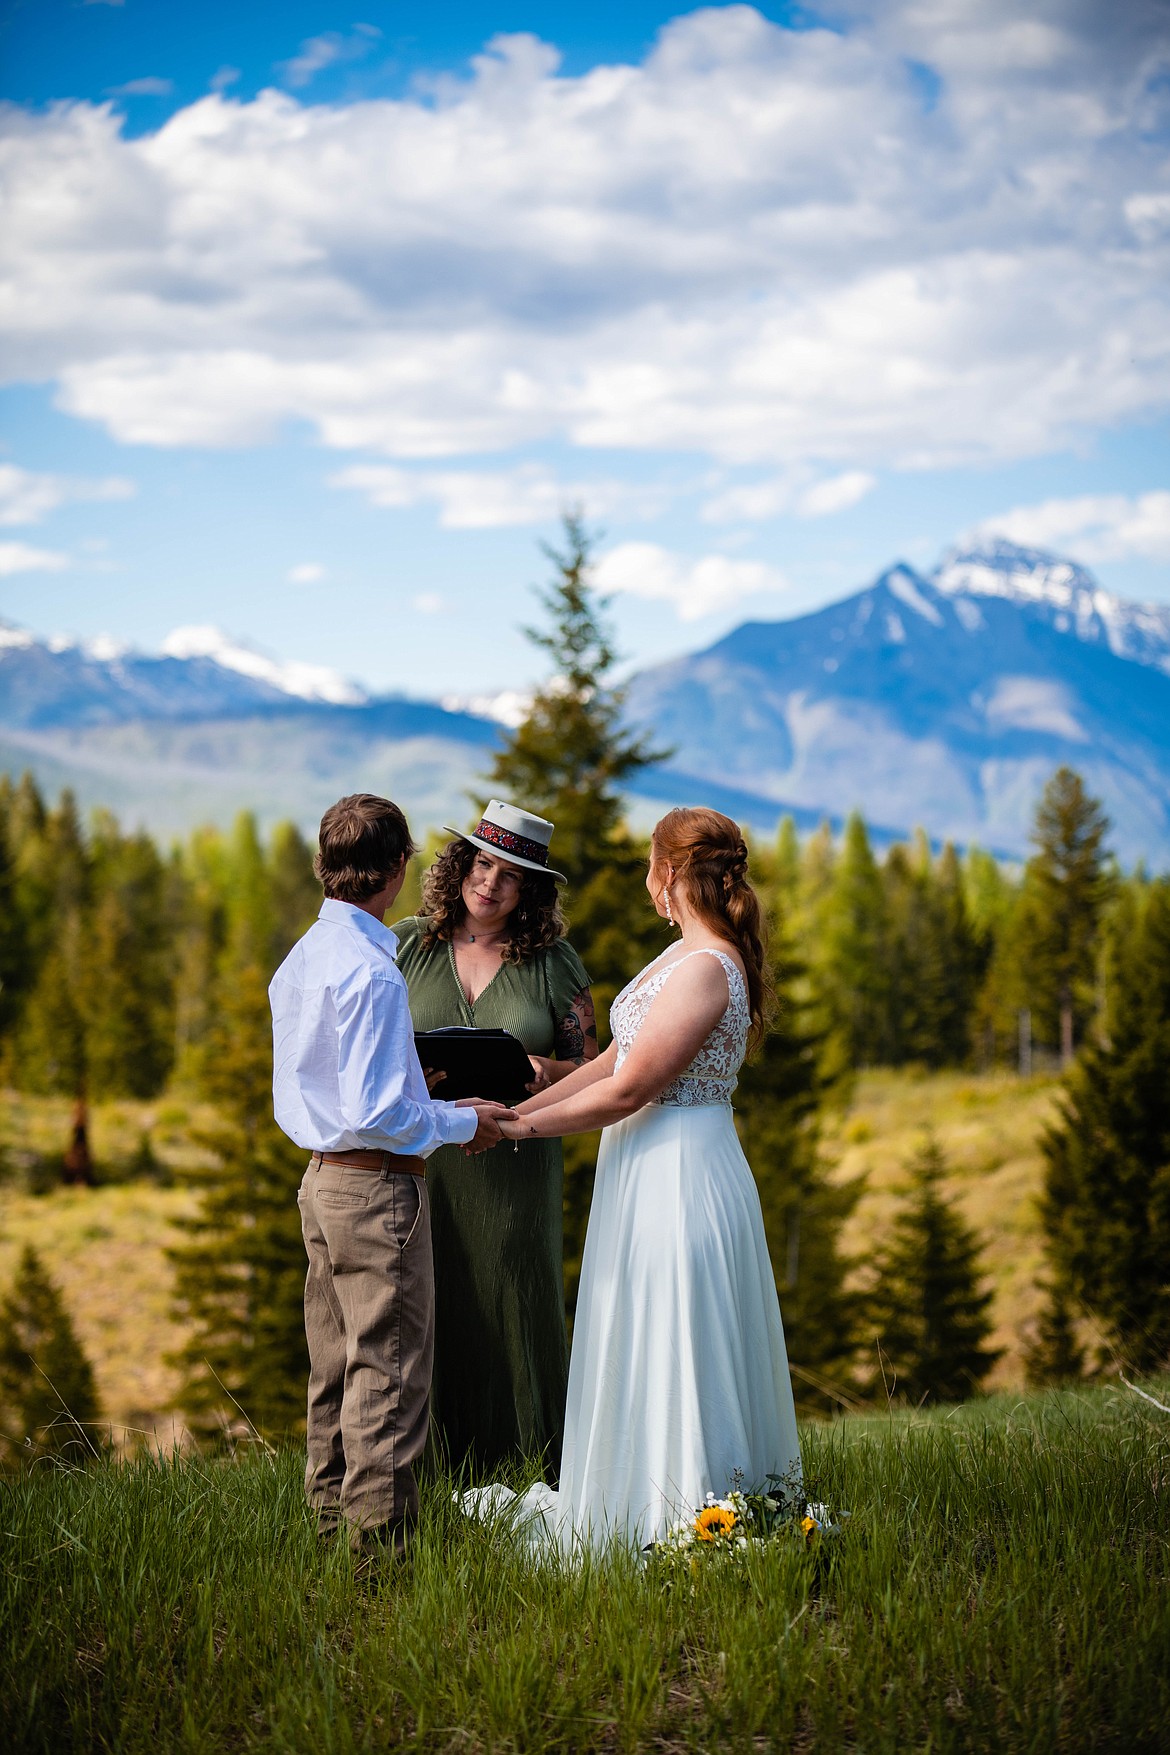 A couple recites their vows during an elopement in Northwest Montana. (Courtesy of Elope Montana).